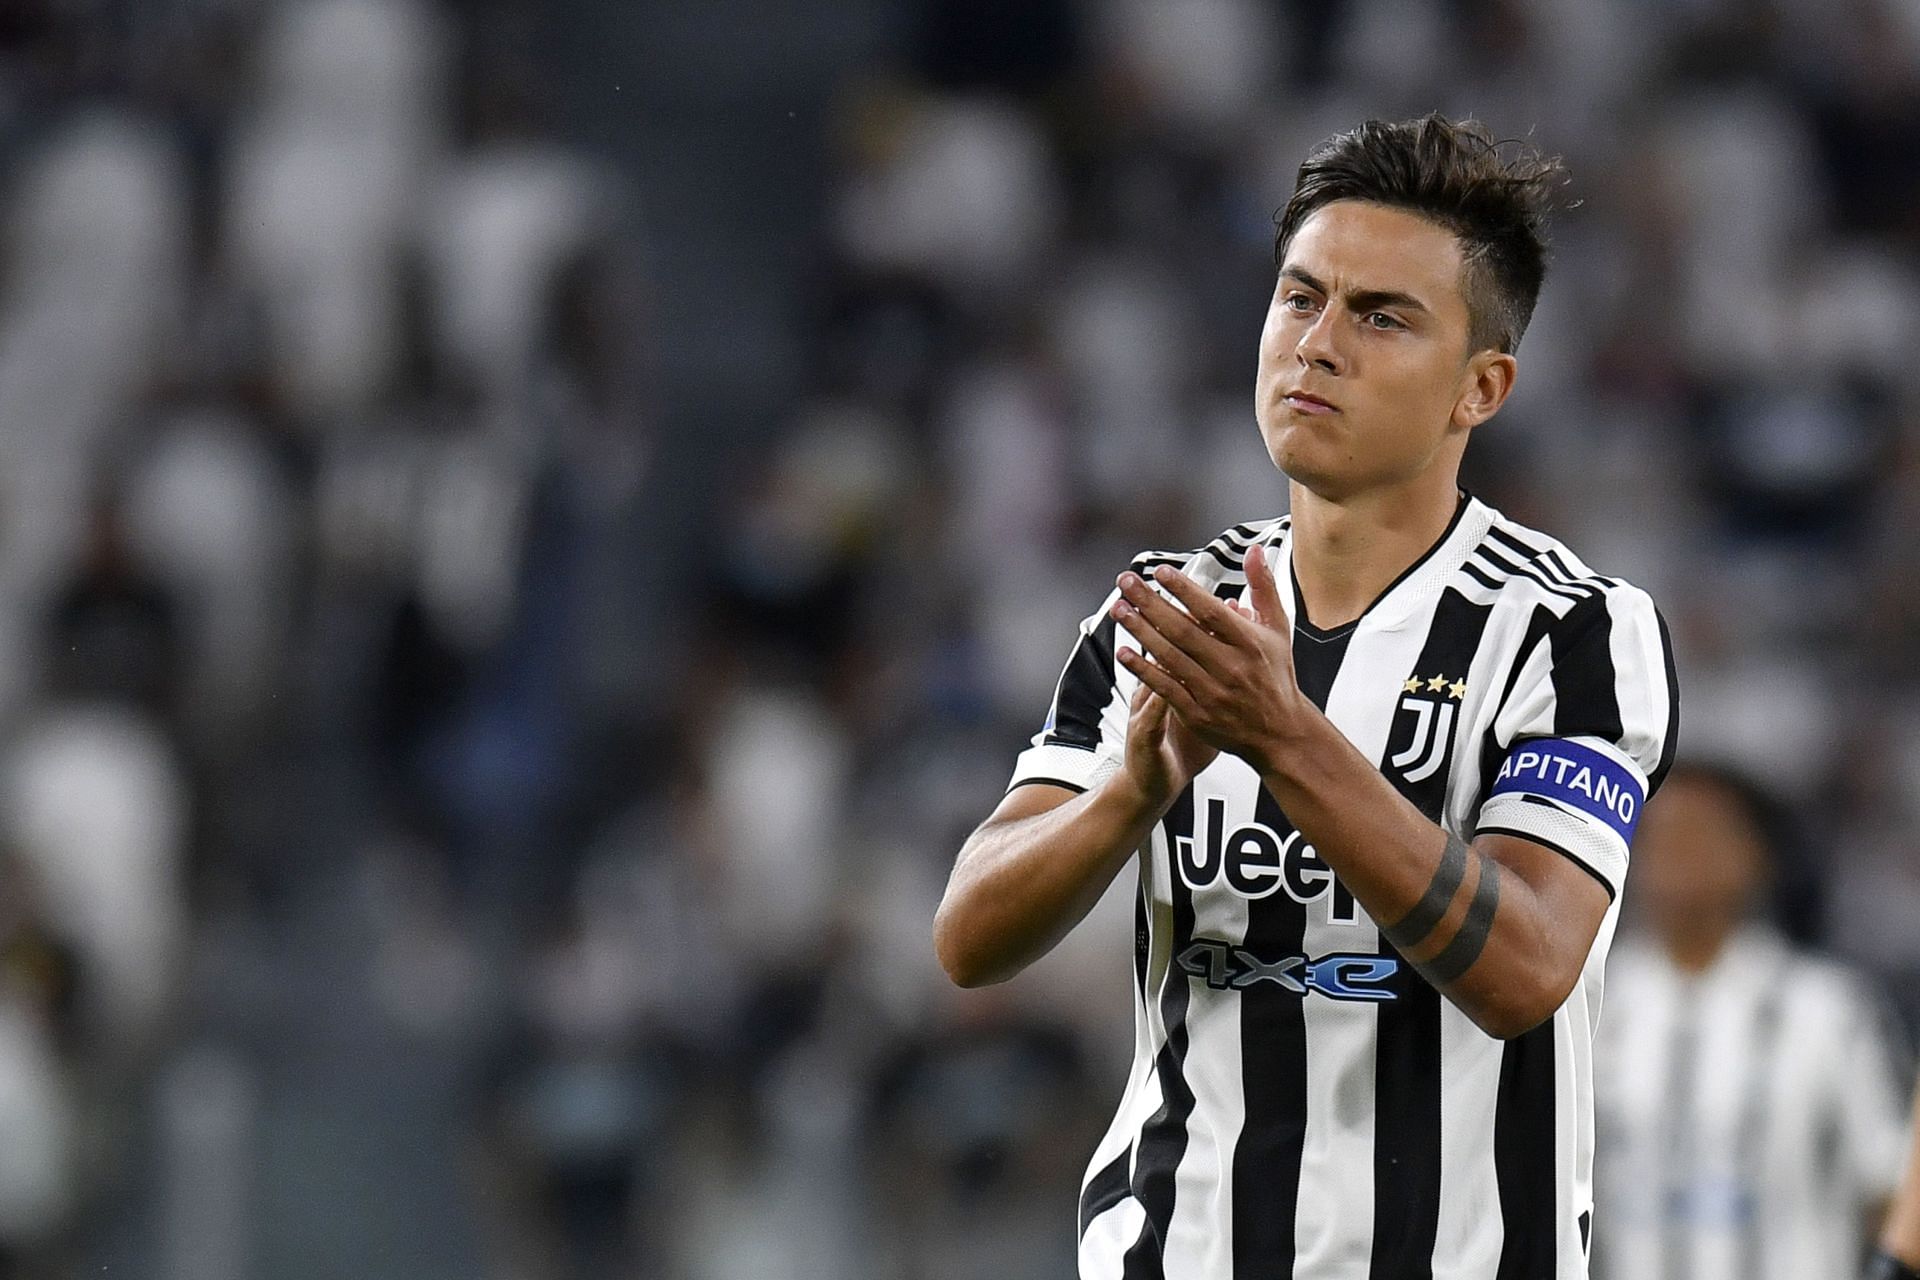 Paulo Dybala is one of the most valuable players at Juventus.